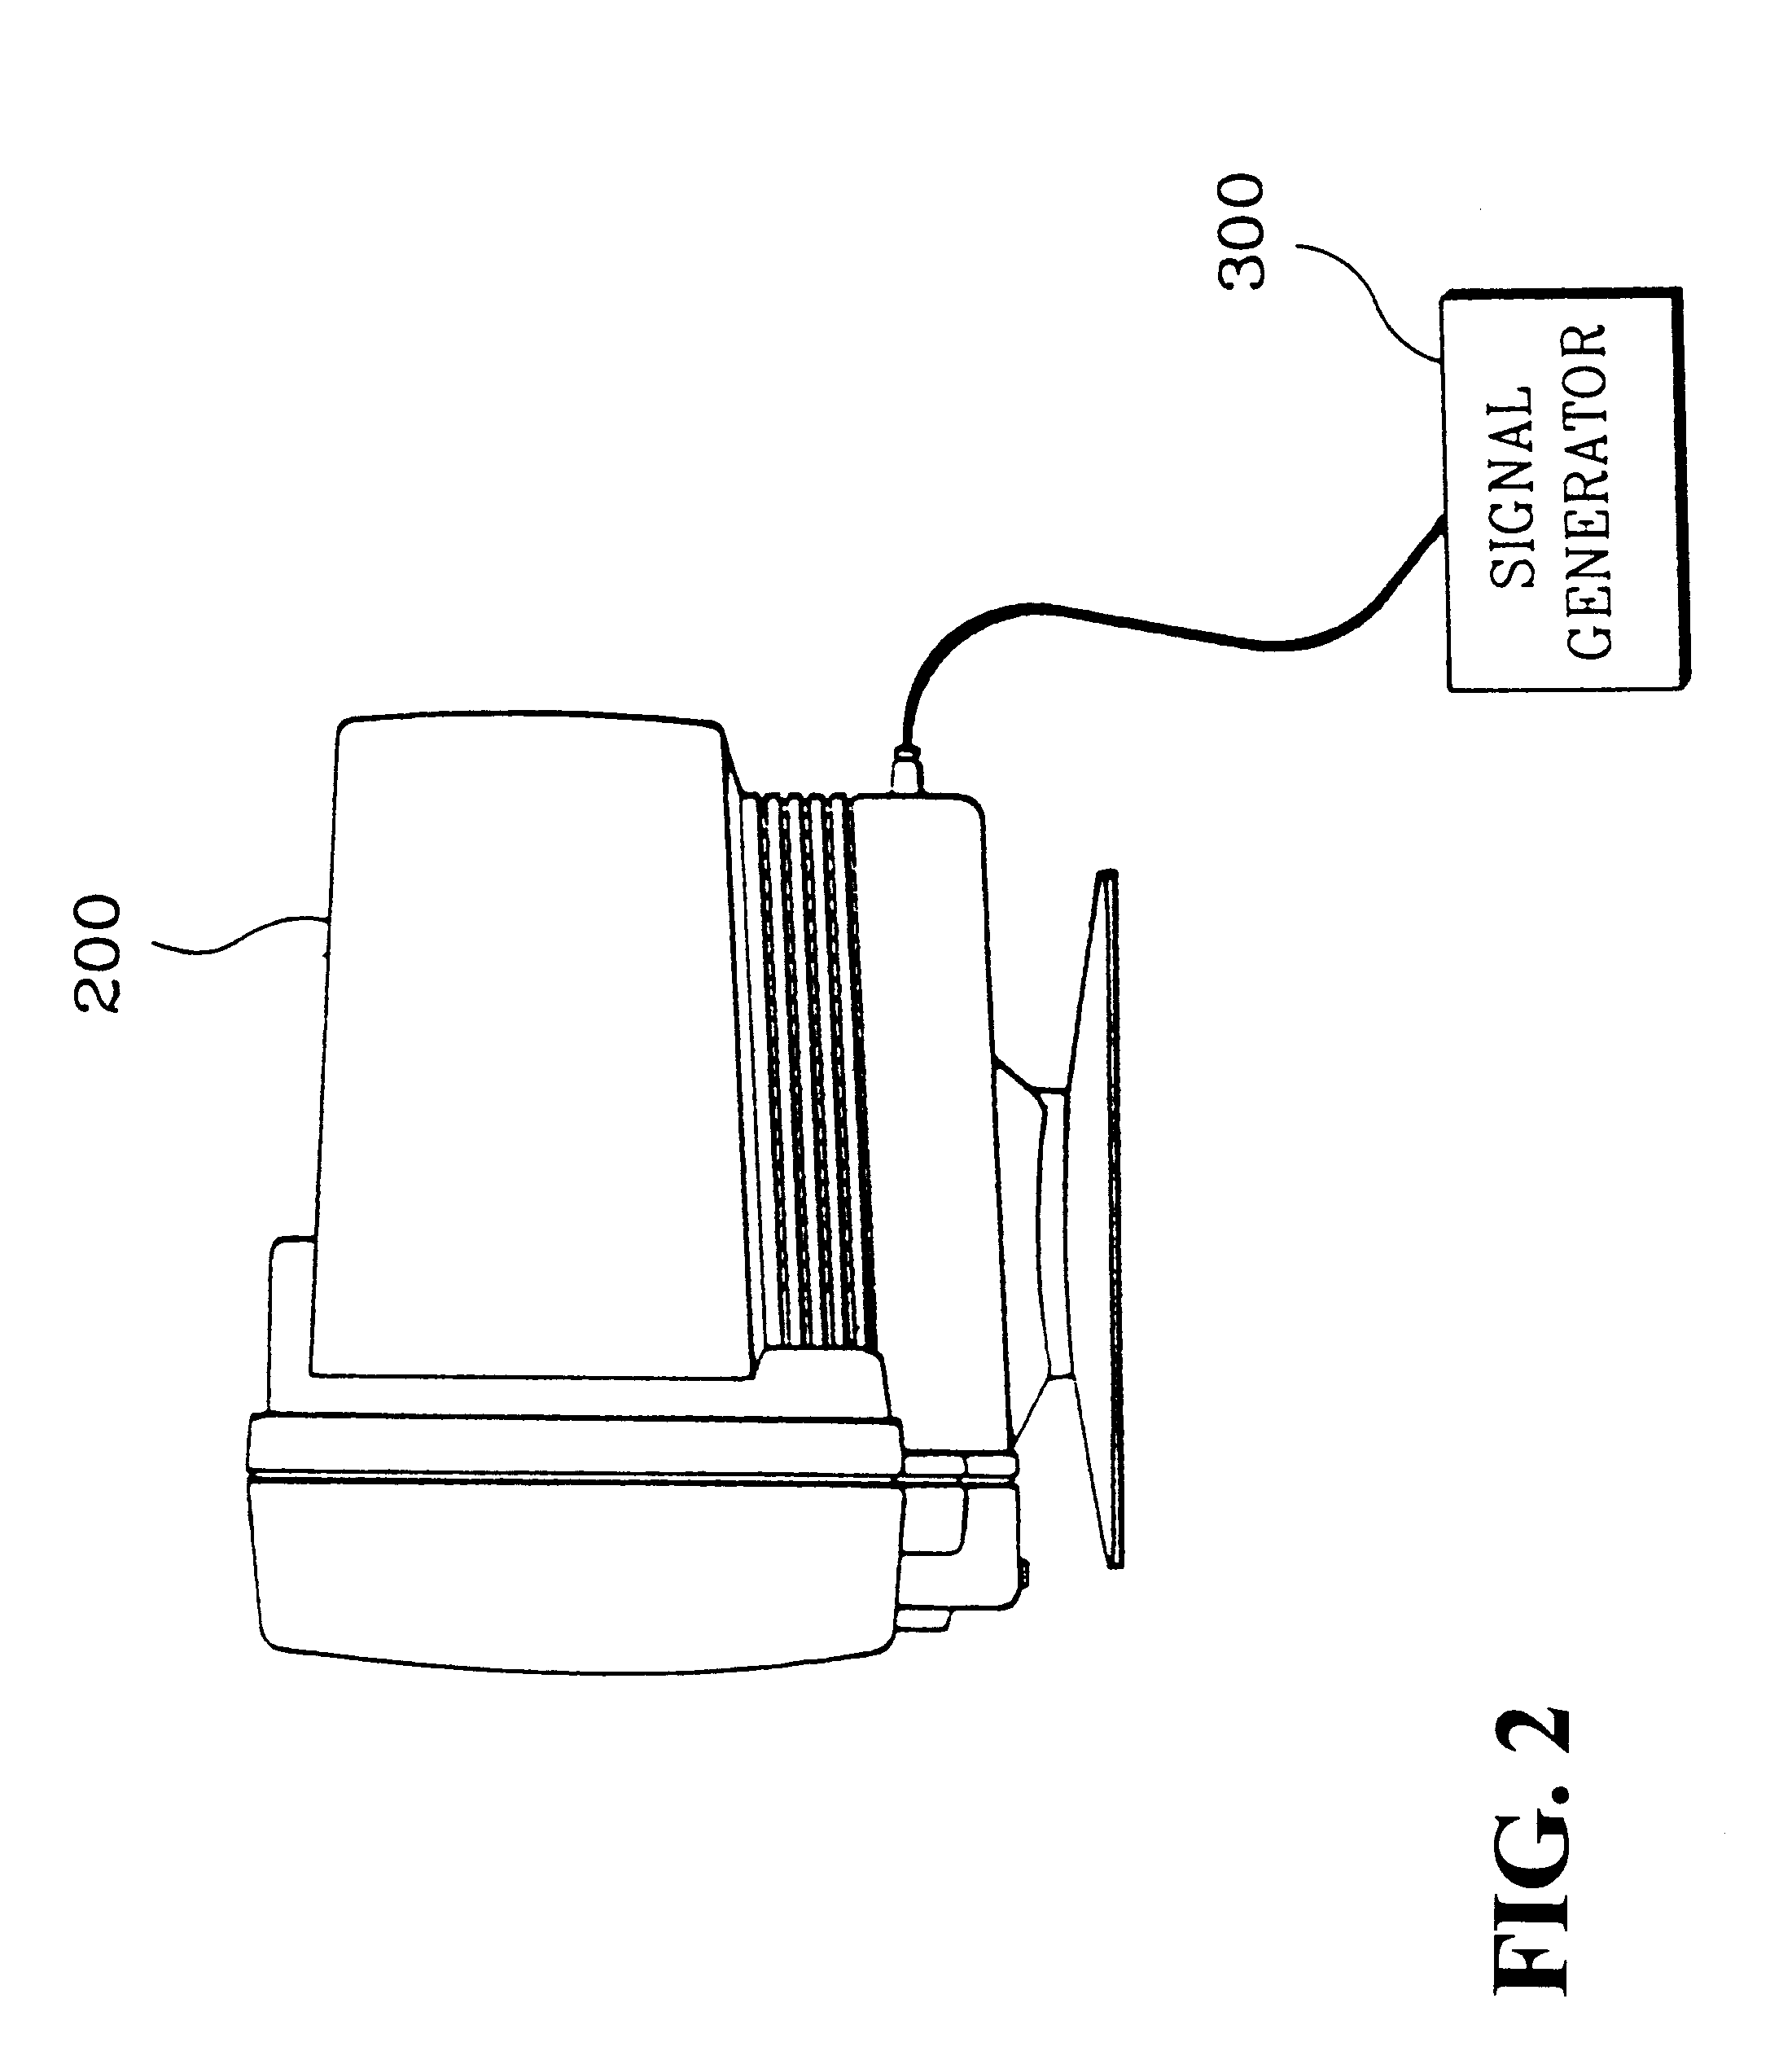 Circuit and method for indicating image adjustment pattern using OSD